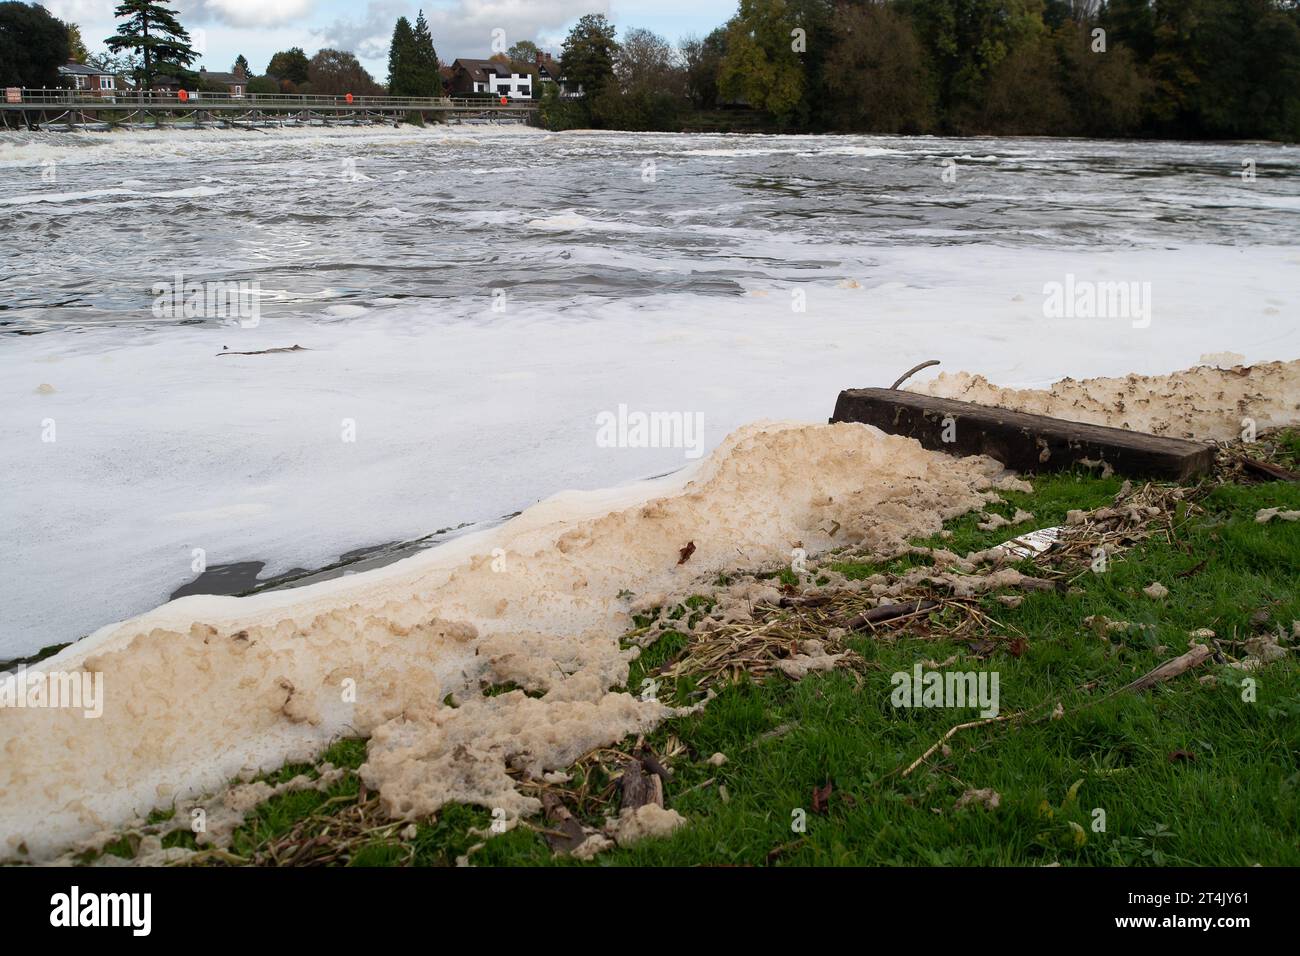 Marlow, Buckinghamshire, UK. 31st October, 2023. Foam collects at the edge of the Marlow Weir in Buckinghamshire after heavy rain in the past few days. Foam on a river can be natural and may start off as white, but often becomes light tan or brown in colour as it collects sediment and organic matter. Foam on a river can alternatively be as a result of pollution. Credit: Maureen McLean/Alamy Live News Stock Photo